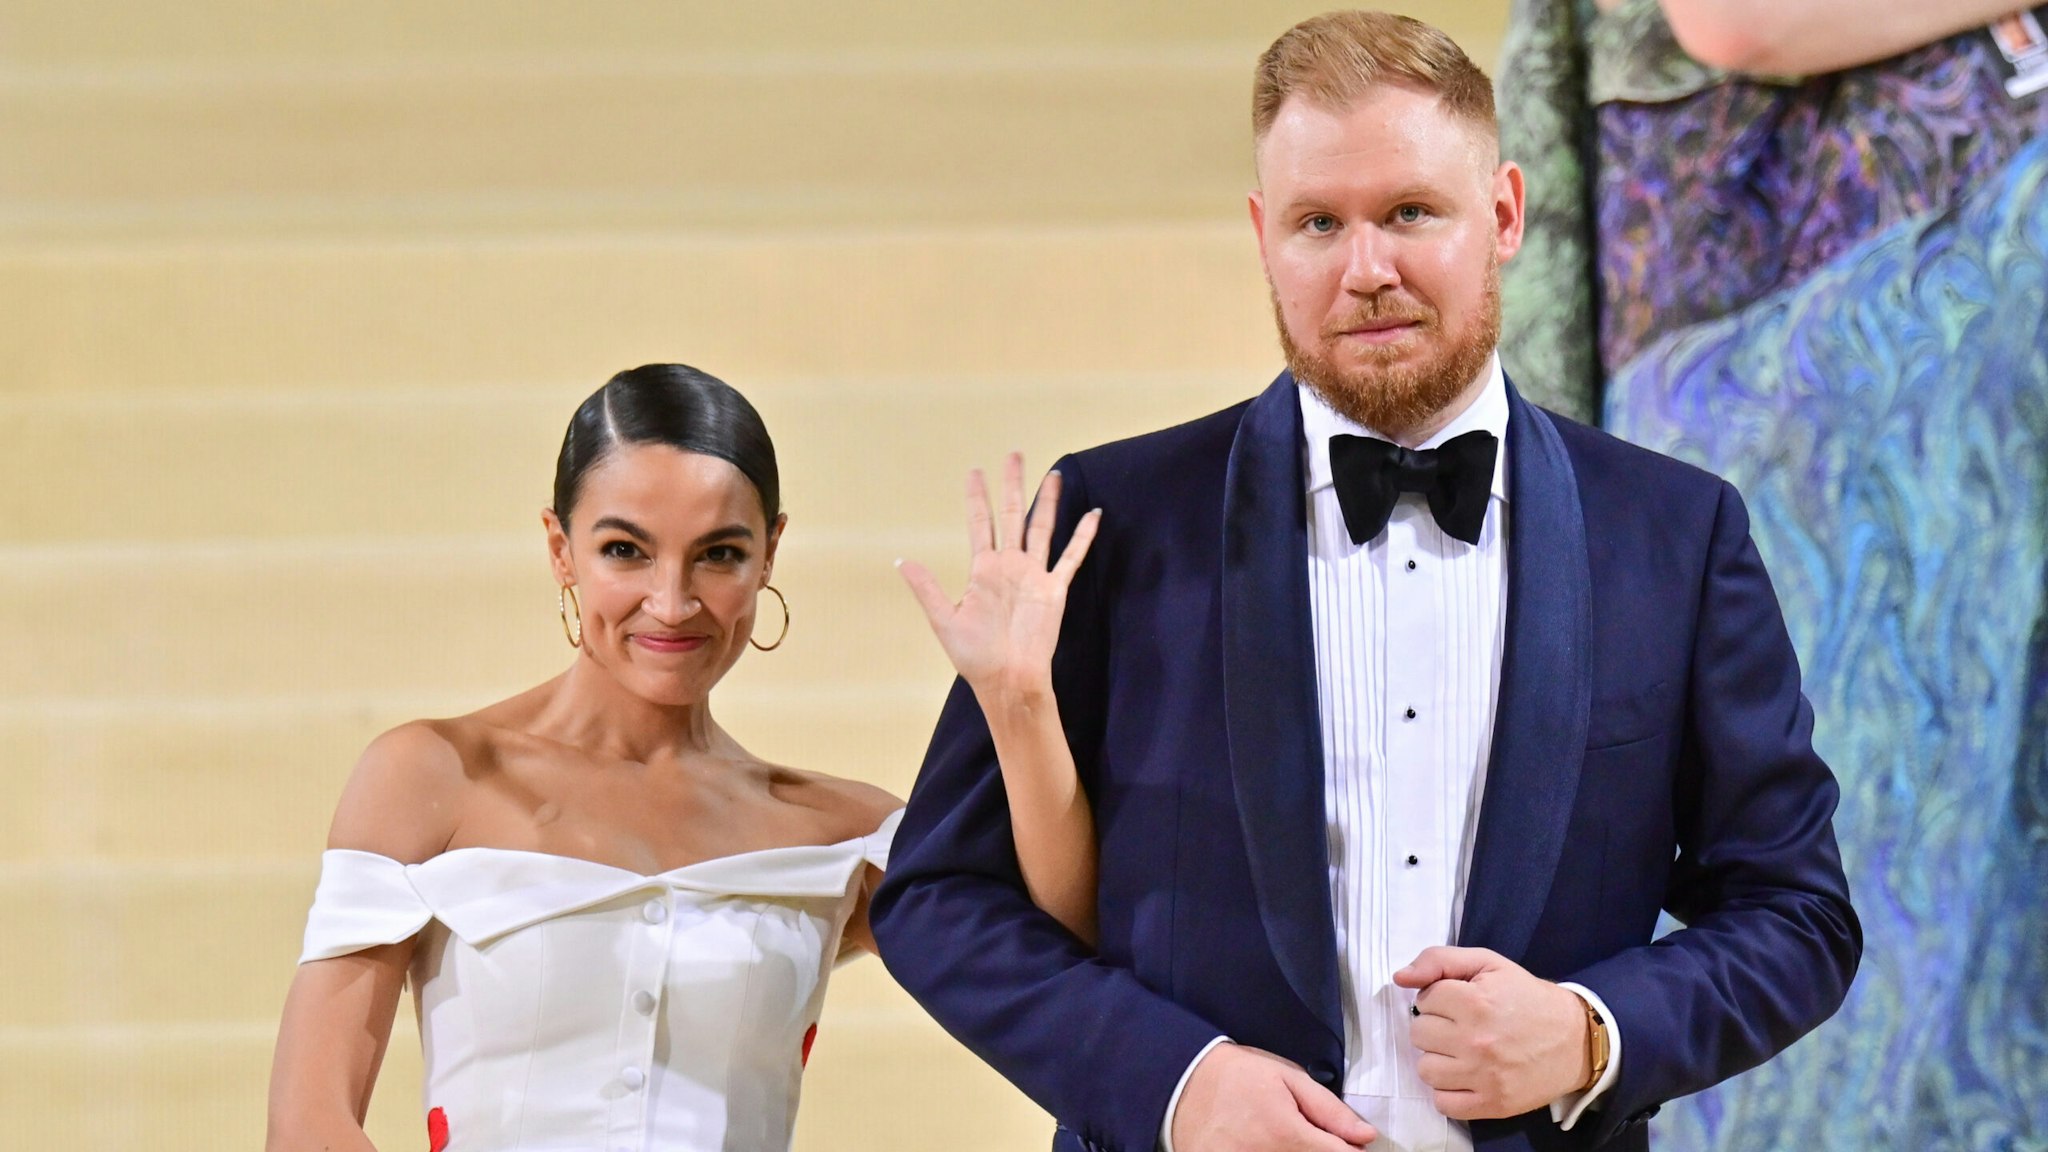 Alexandria Ocasio-Cortez and Riley Roberts leave the 2021 Met Gala Celebrating In America: A Lexicon Of Fashion at Metropolitan Museum of Art on September 13, 2021 in New York City.